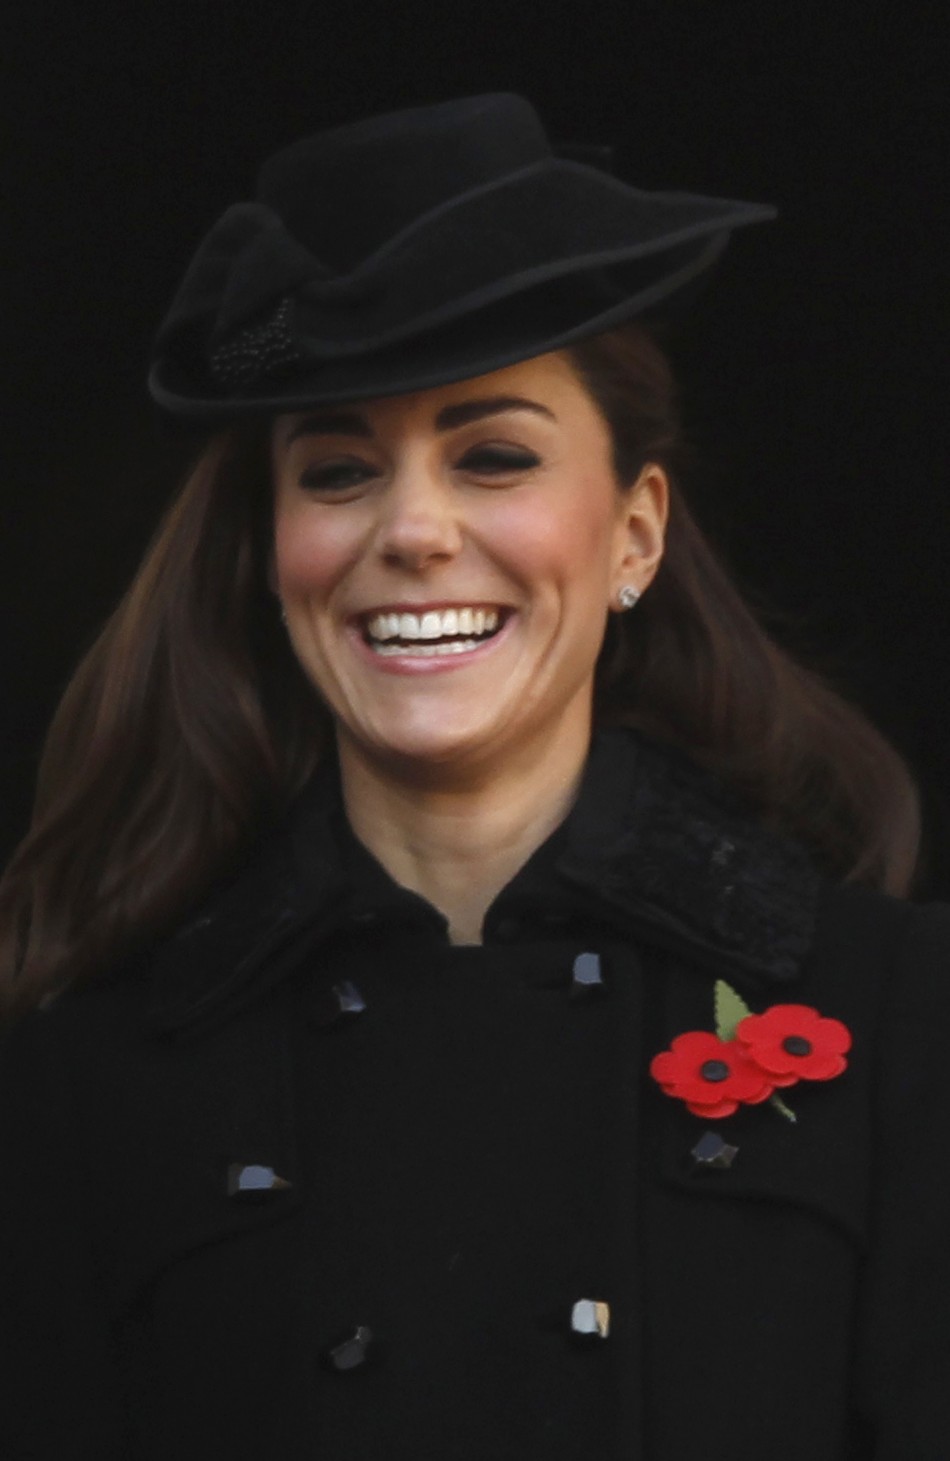 Kate Middleton Hats for Auction